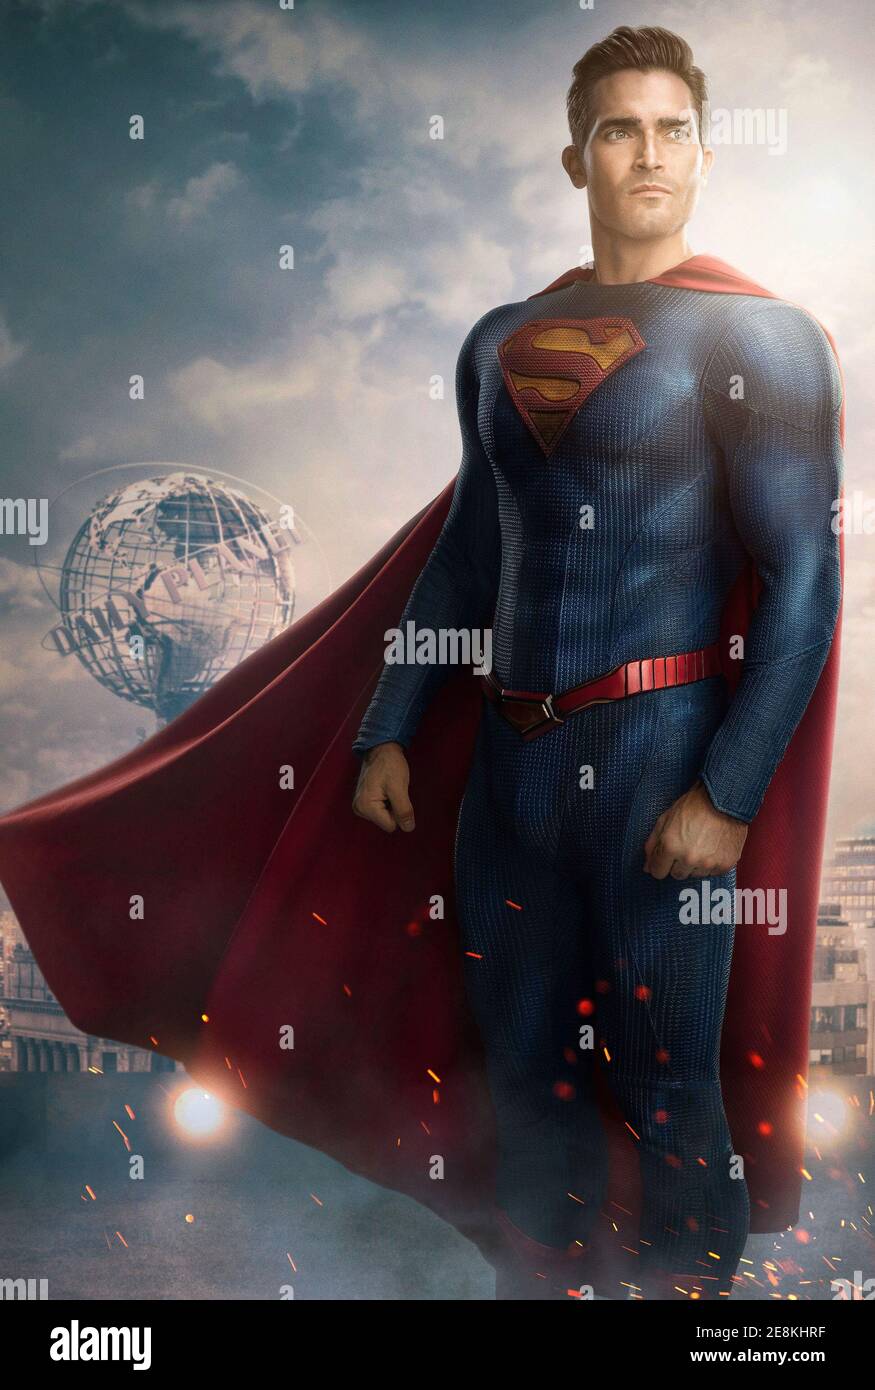 TYLER HOECHLIN in SUPERMAN AND LOIS (2021), directed by LEE TOLAND KRIEGER and RACHEL TALALAY. Credit: WARNER BROS. TELEVISION / Album Stock Photo